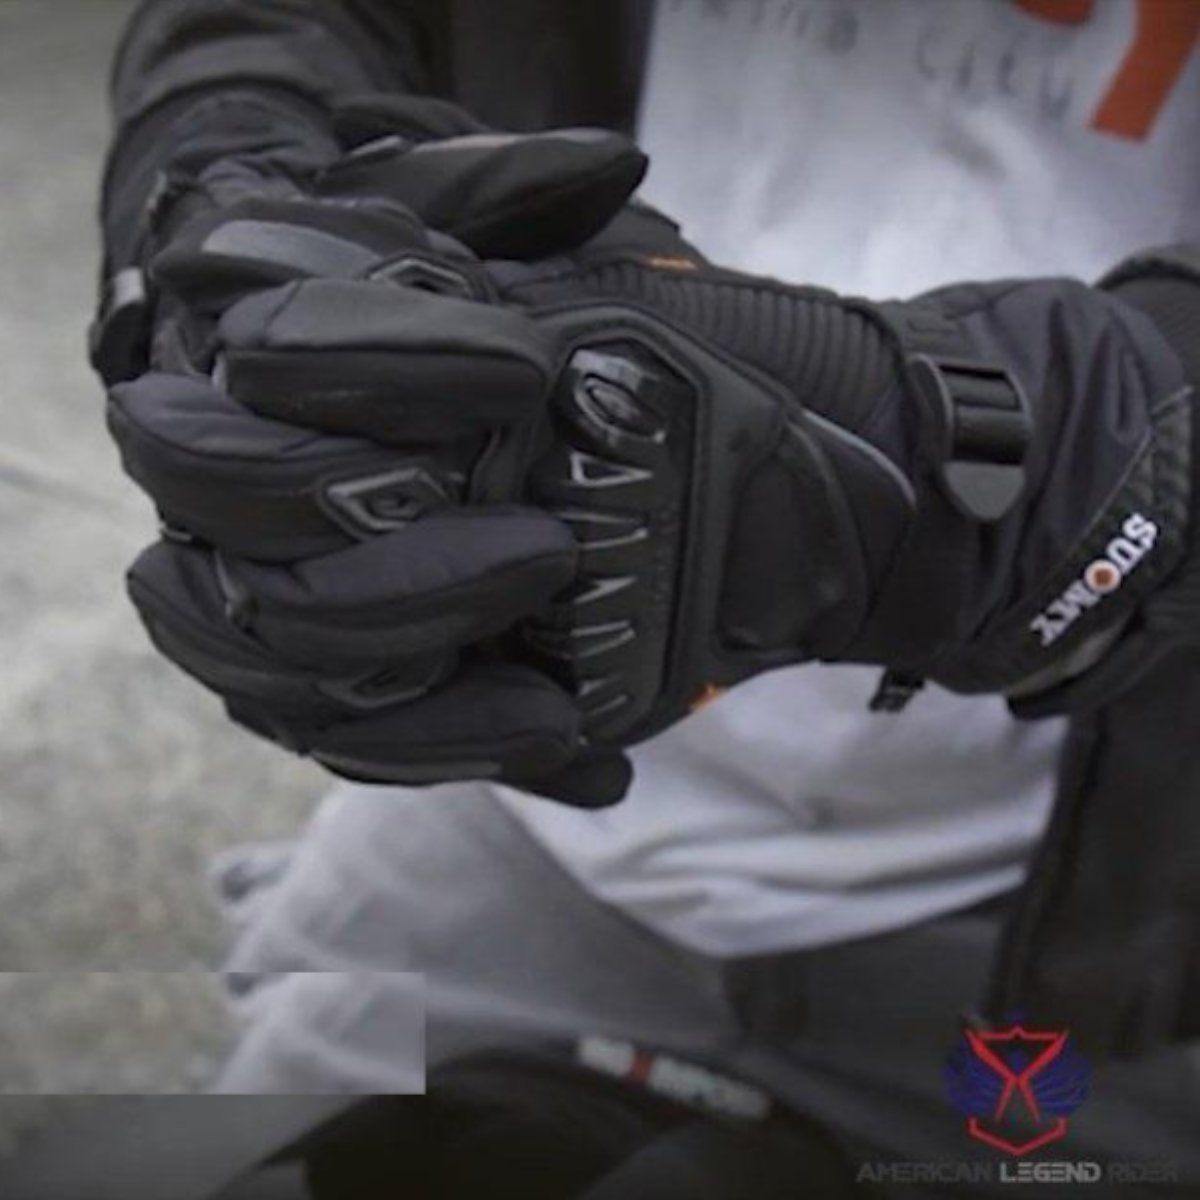 Richa Arctic winter gloves review